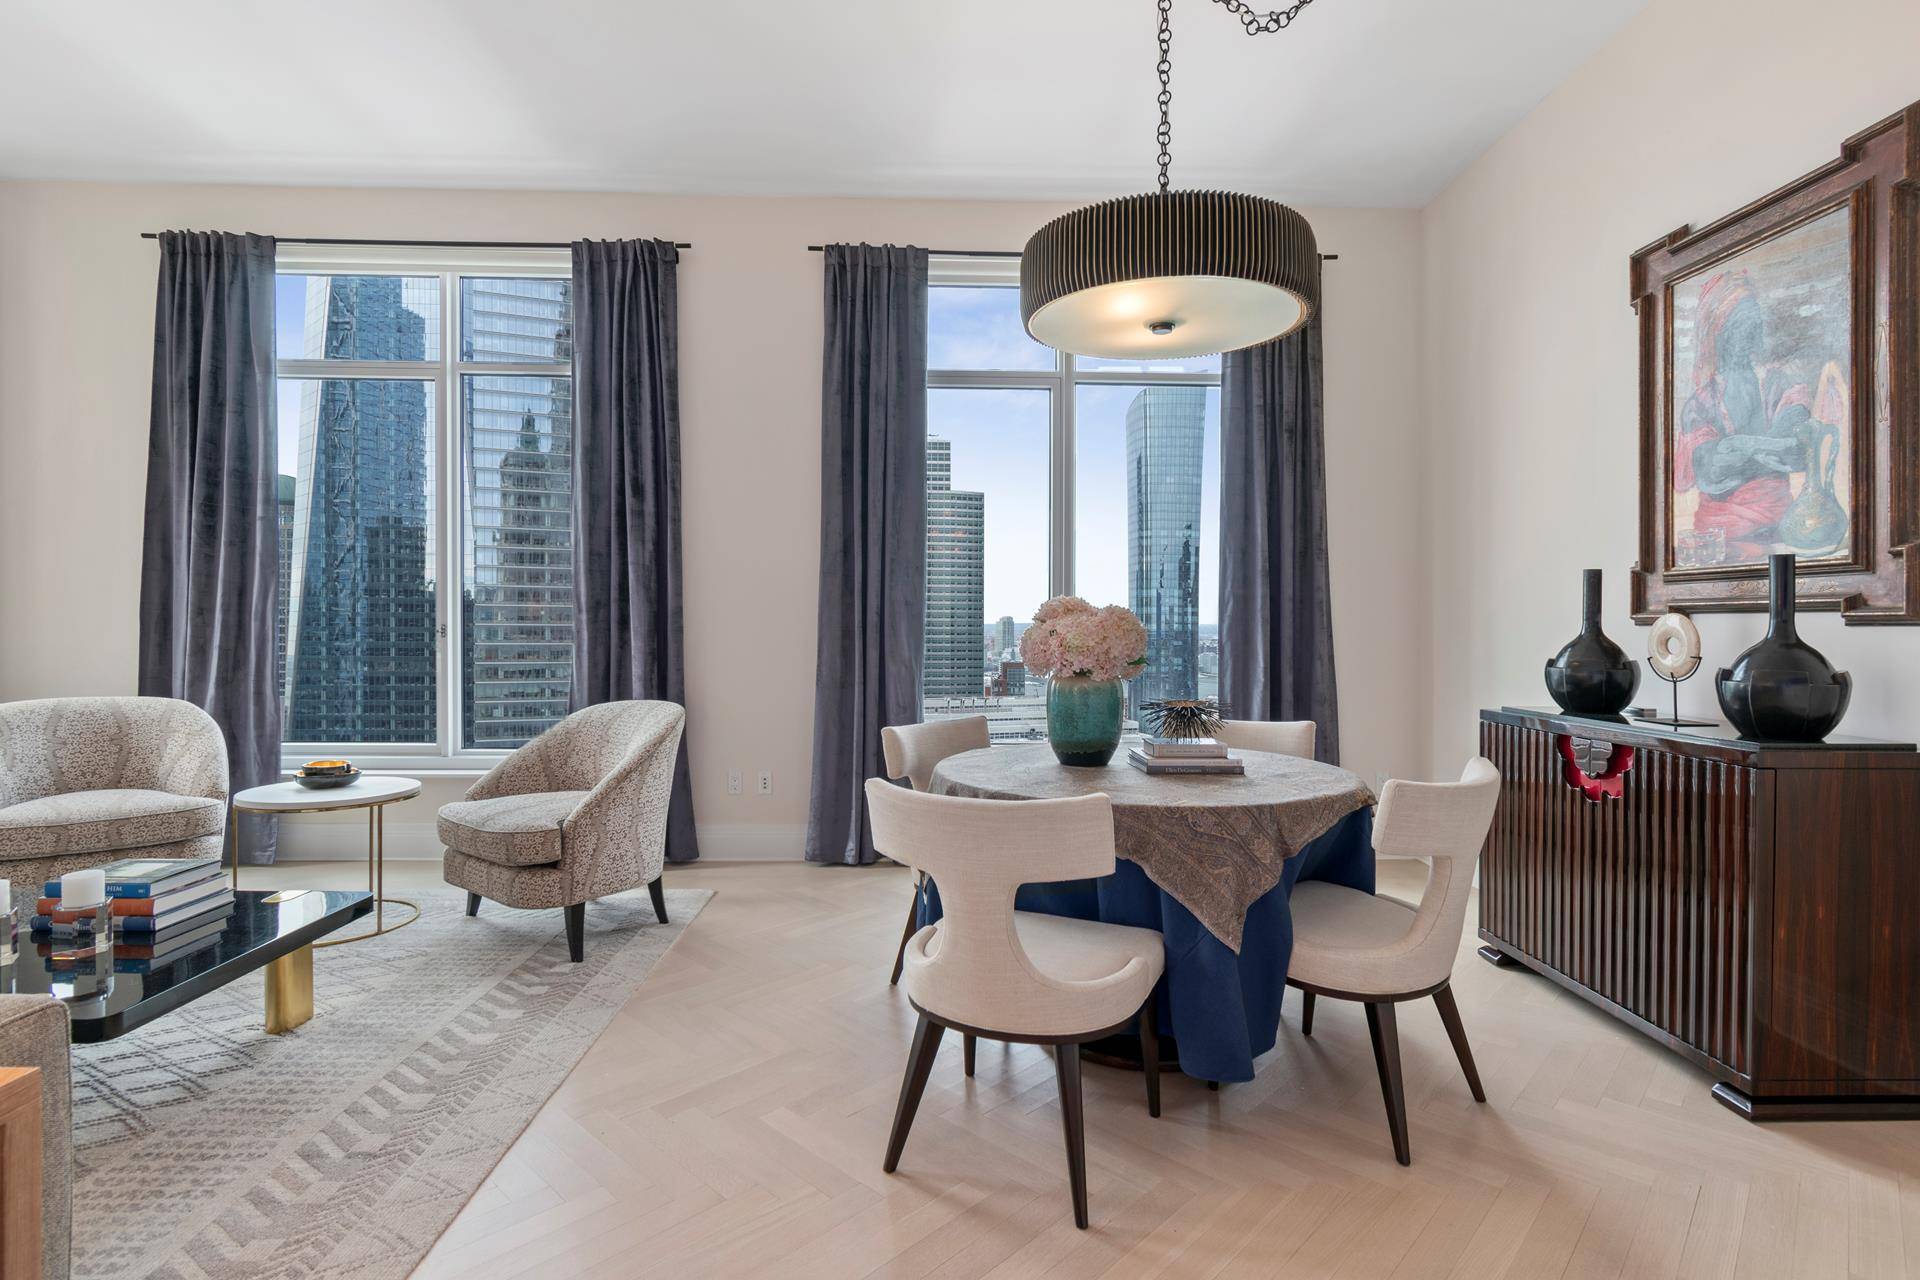 Welcome to one of the most desirable apartments at 30 Park Place.